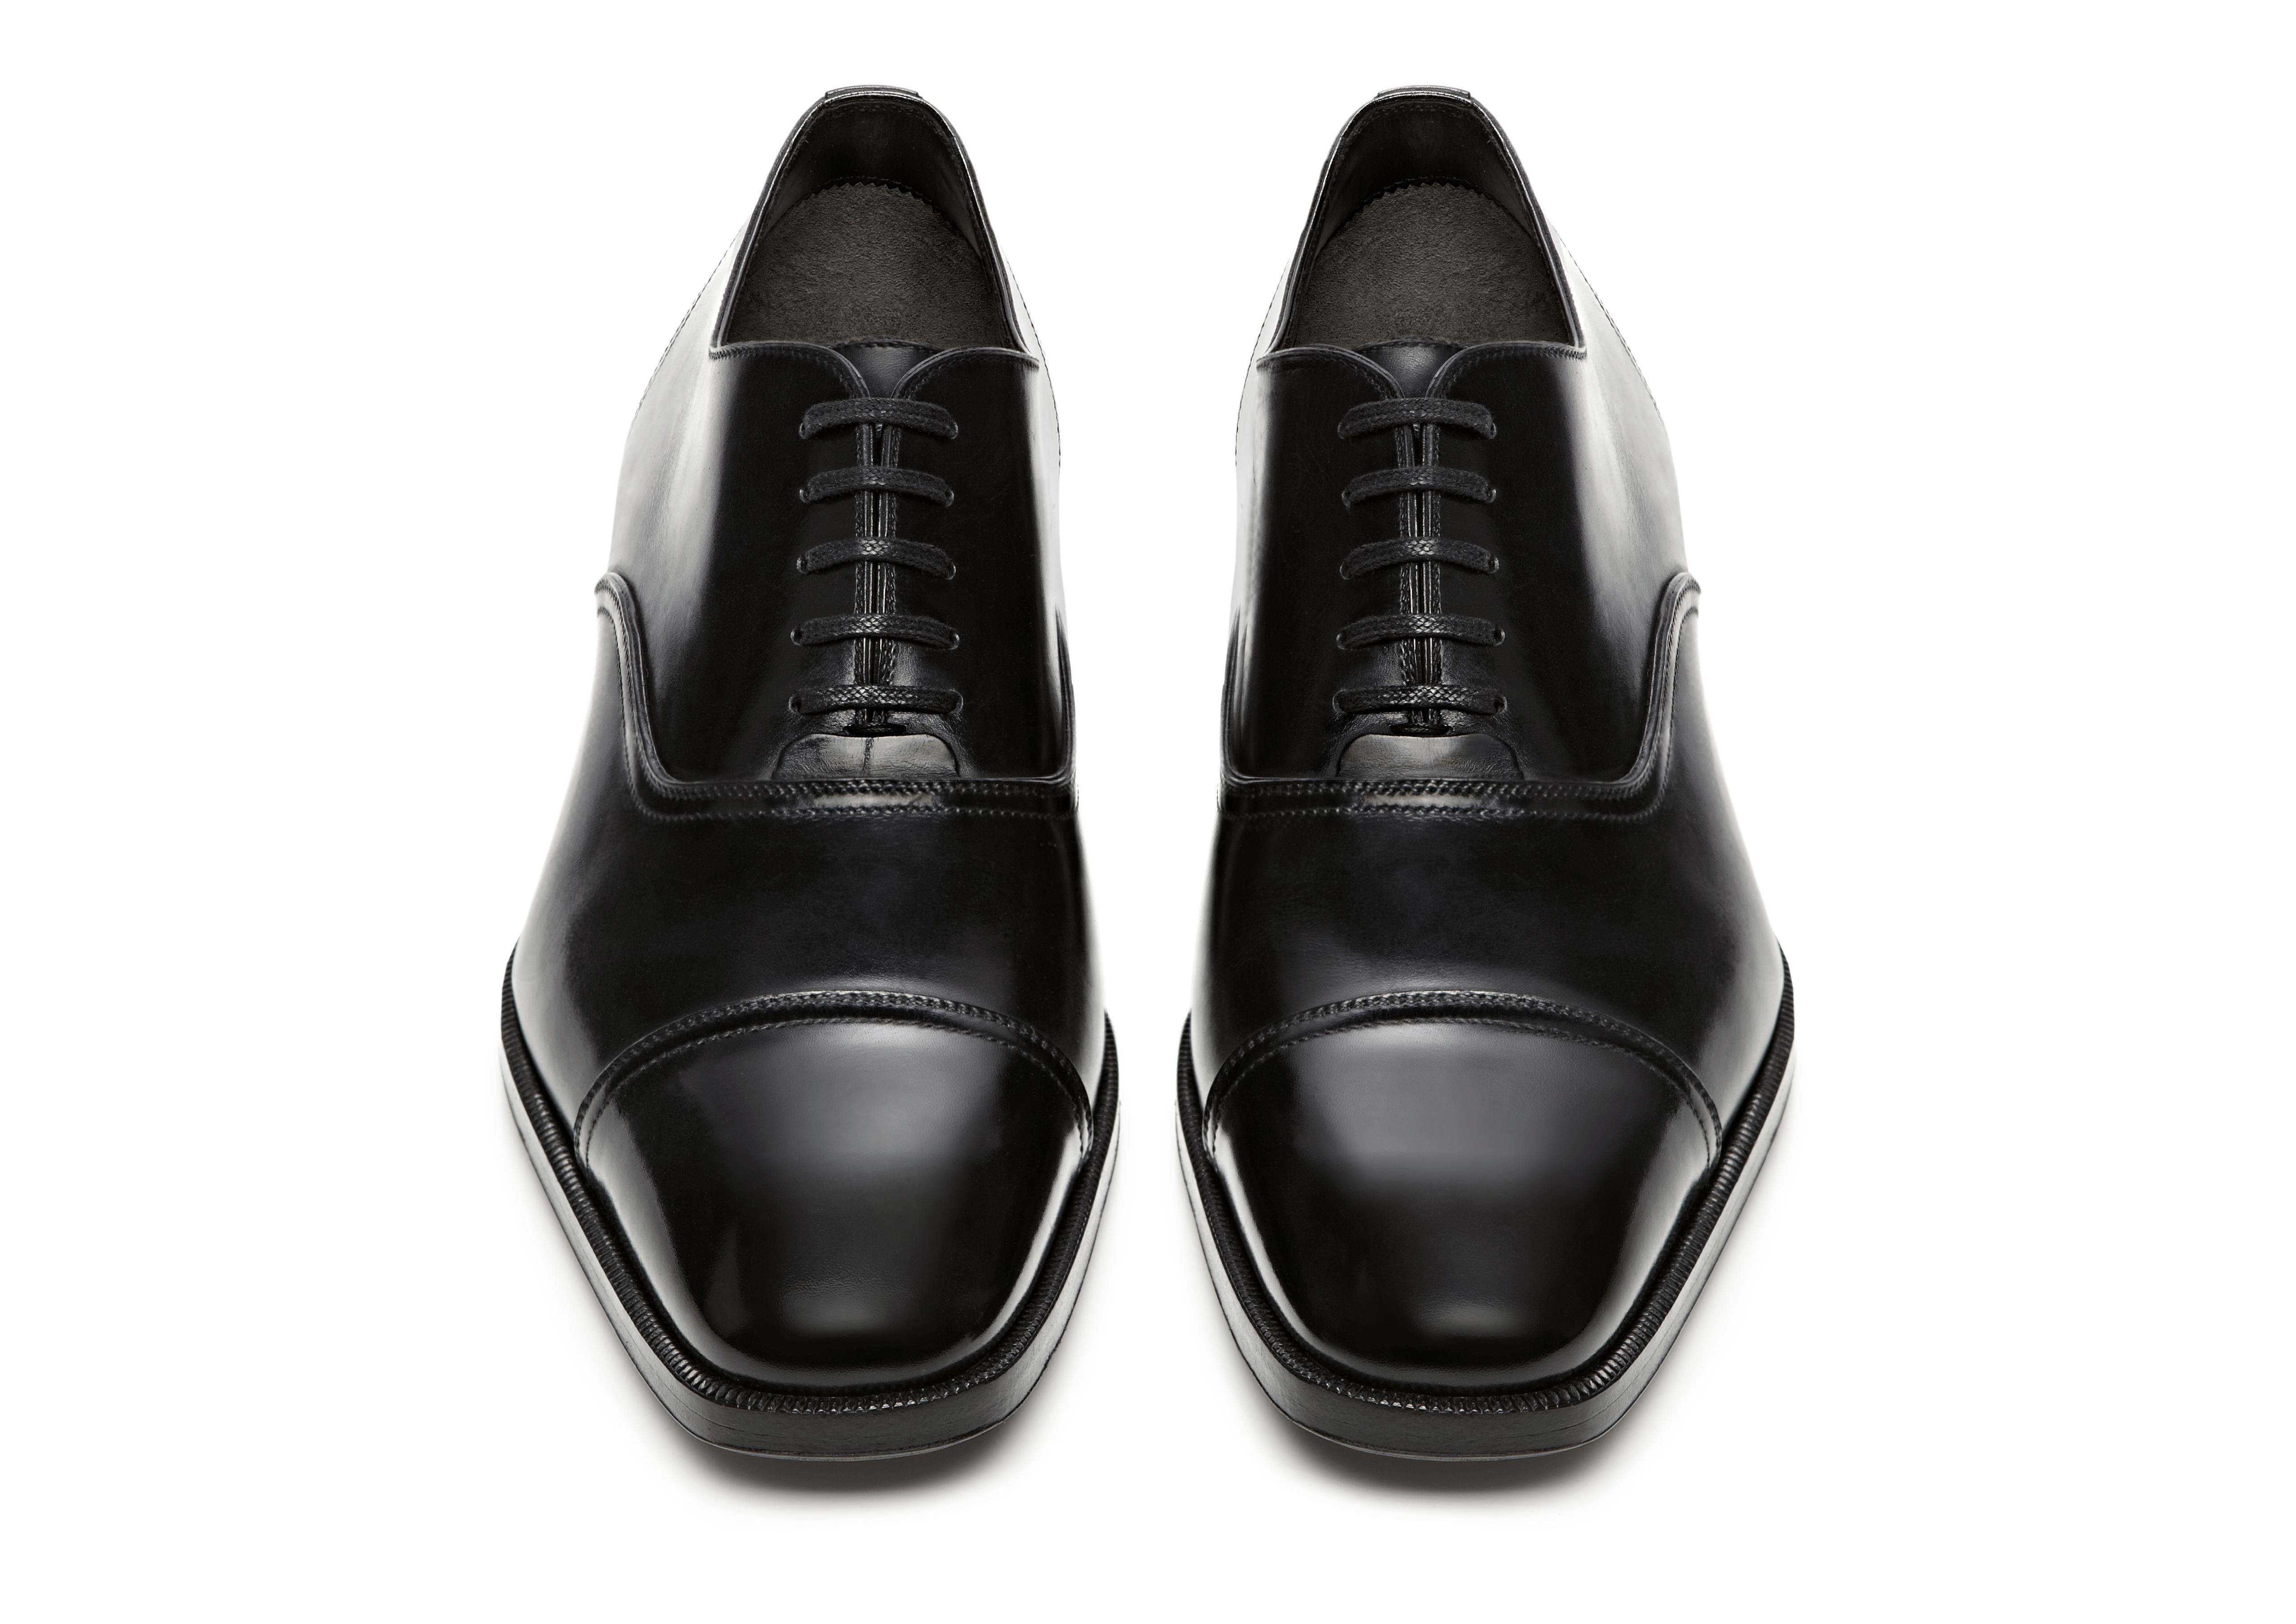 tom ford dress shoes